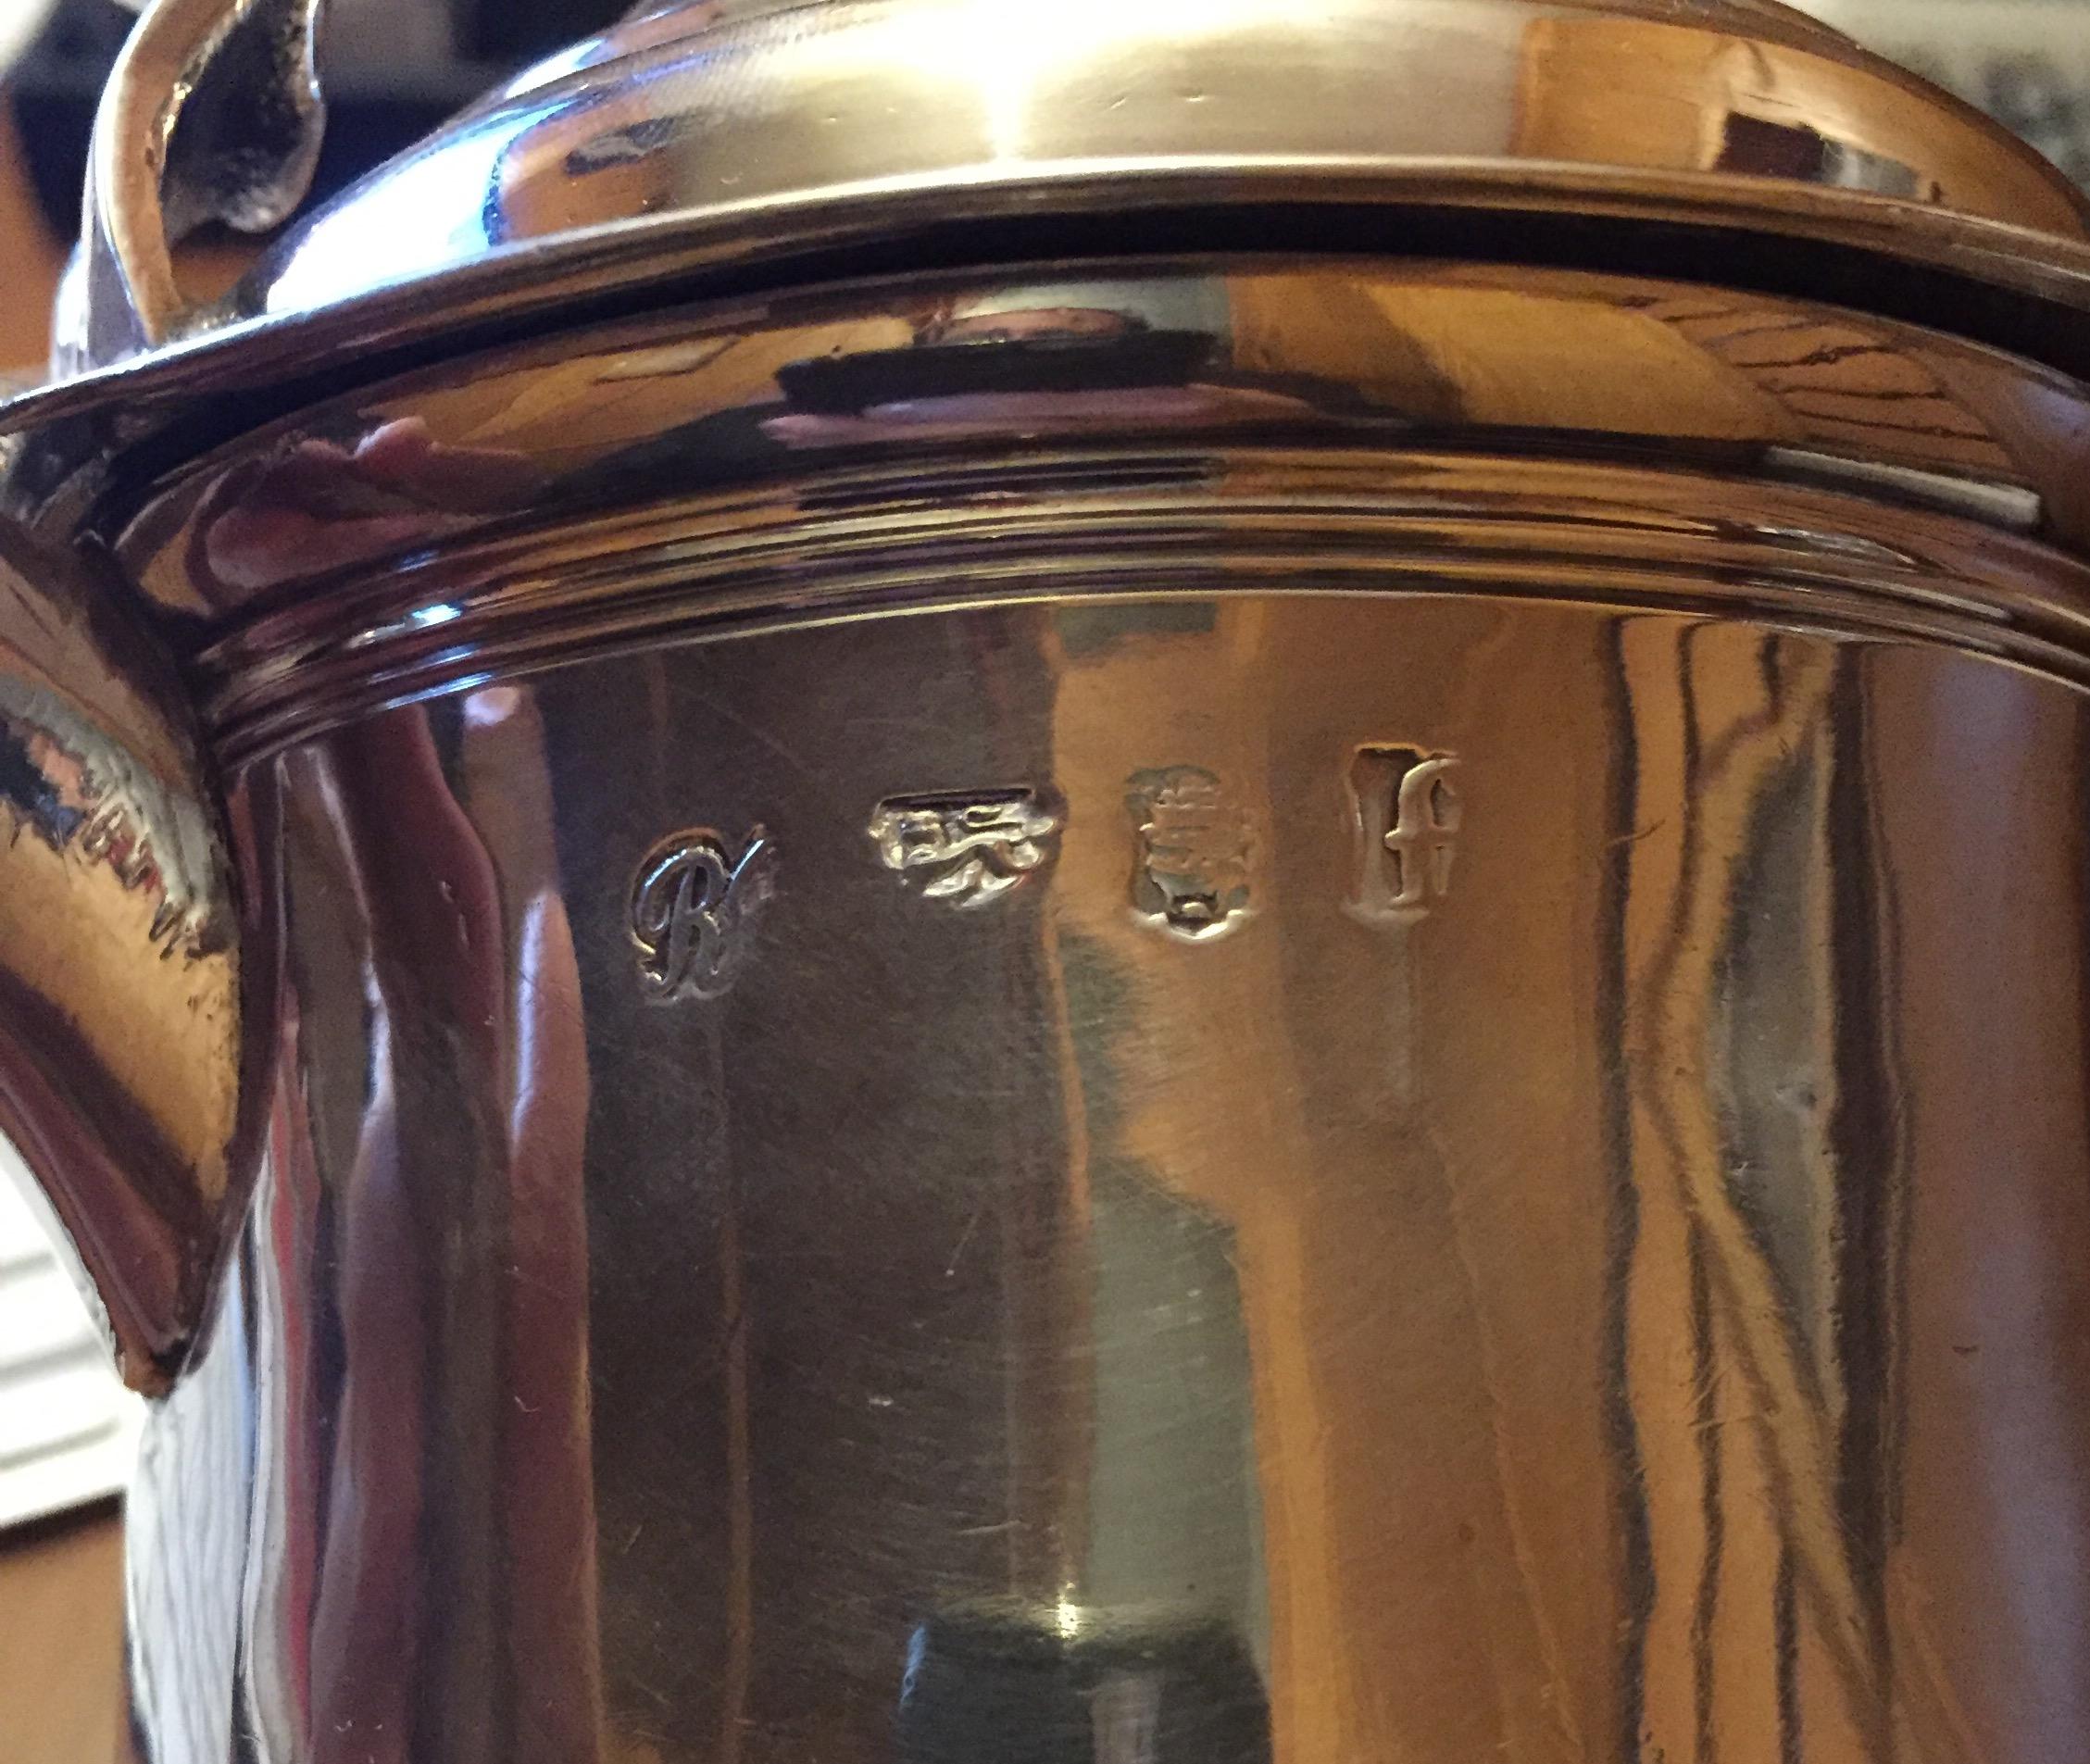 Georgian silver tankard, mark of Robert Brown made in London 1741 , marked on top and on the right side with the typical marks of English silver ,the head of the lion symbol of London city and letter f that means was made in that date. A George II